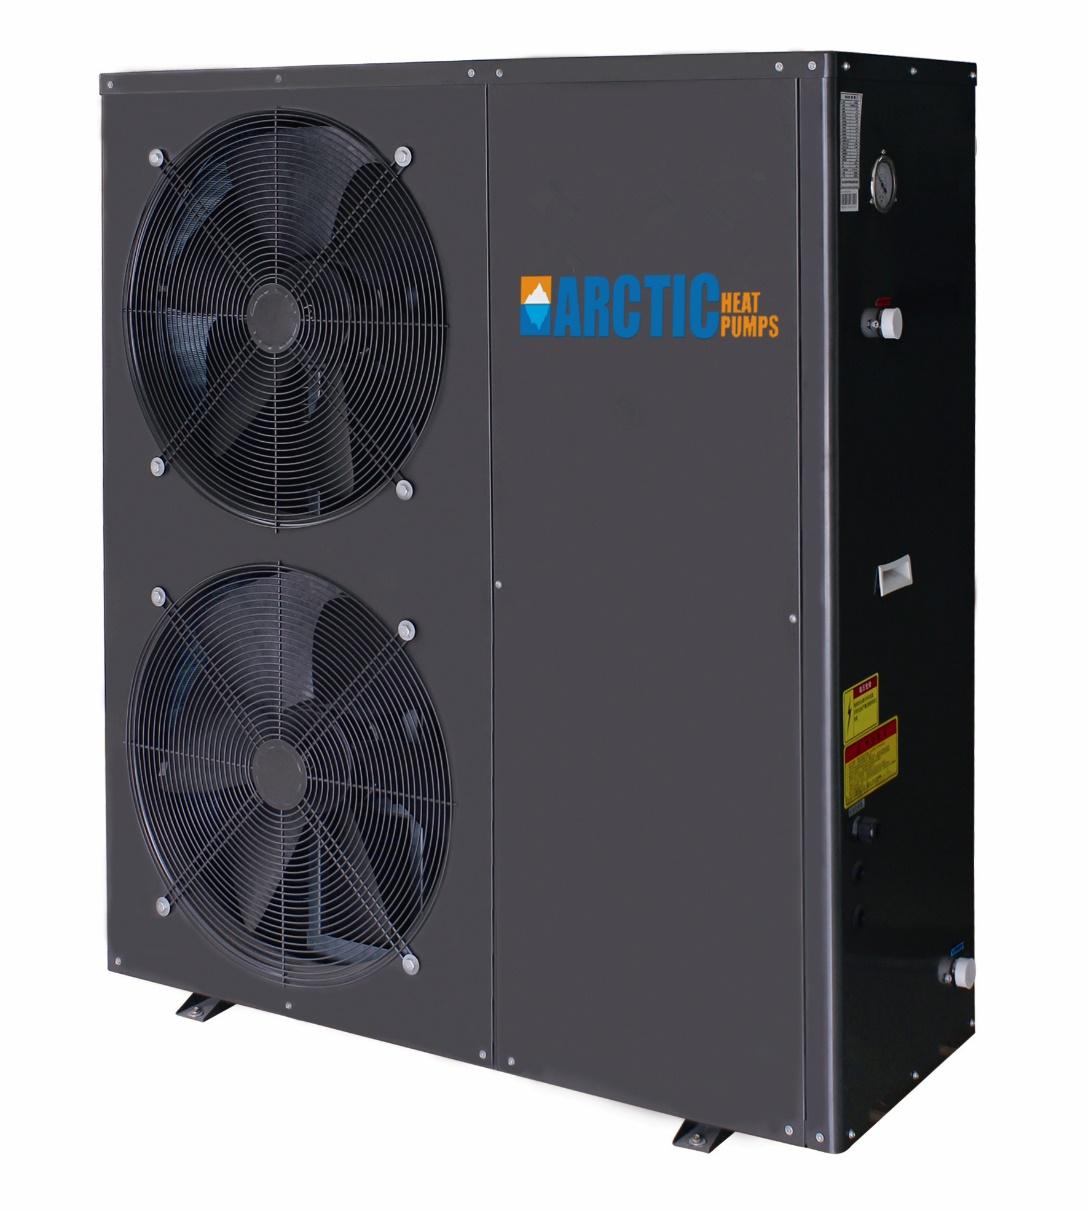 Arctic Hydronic Air to Water Heat Pump - 60,000 BTU with Cold Climate Inverter Technology